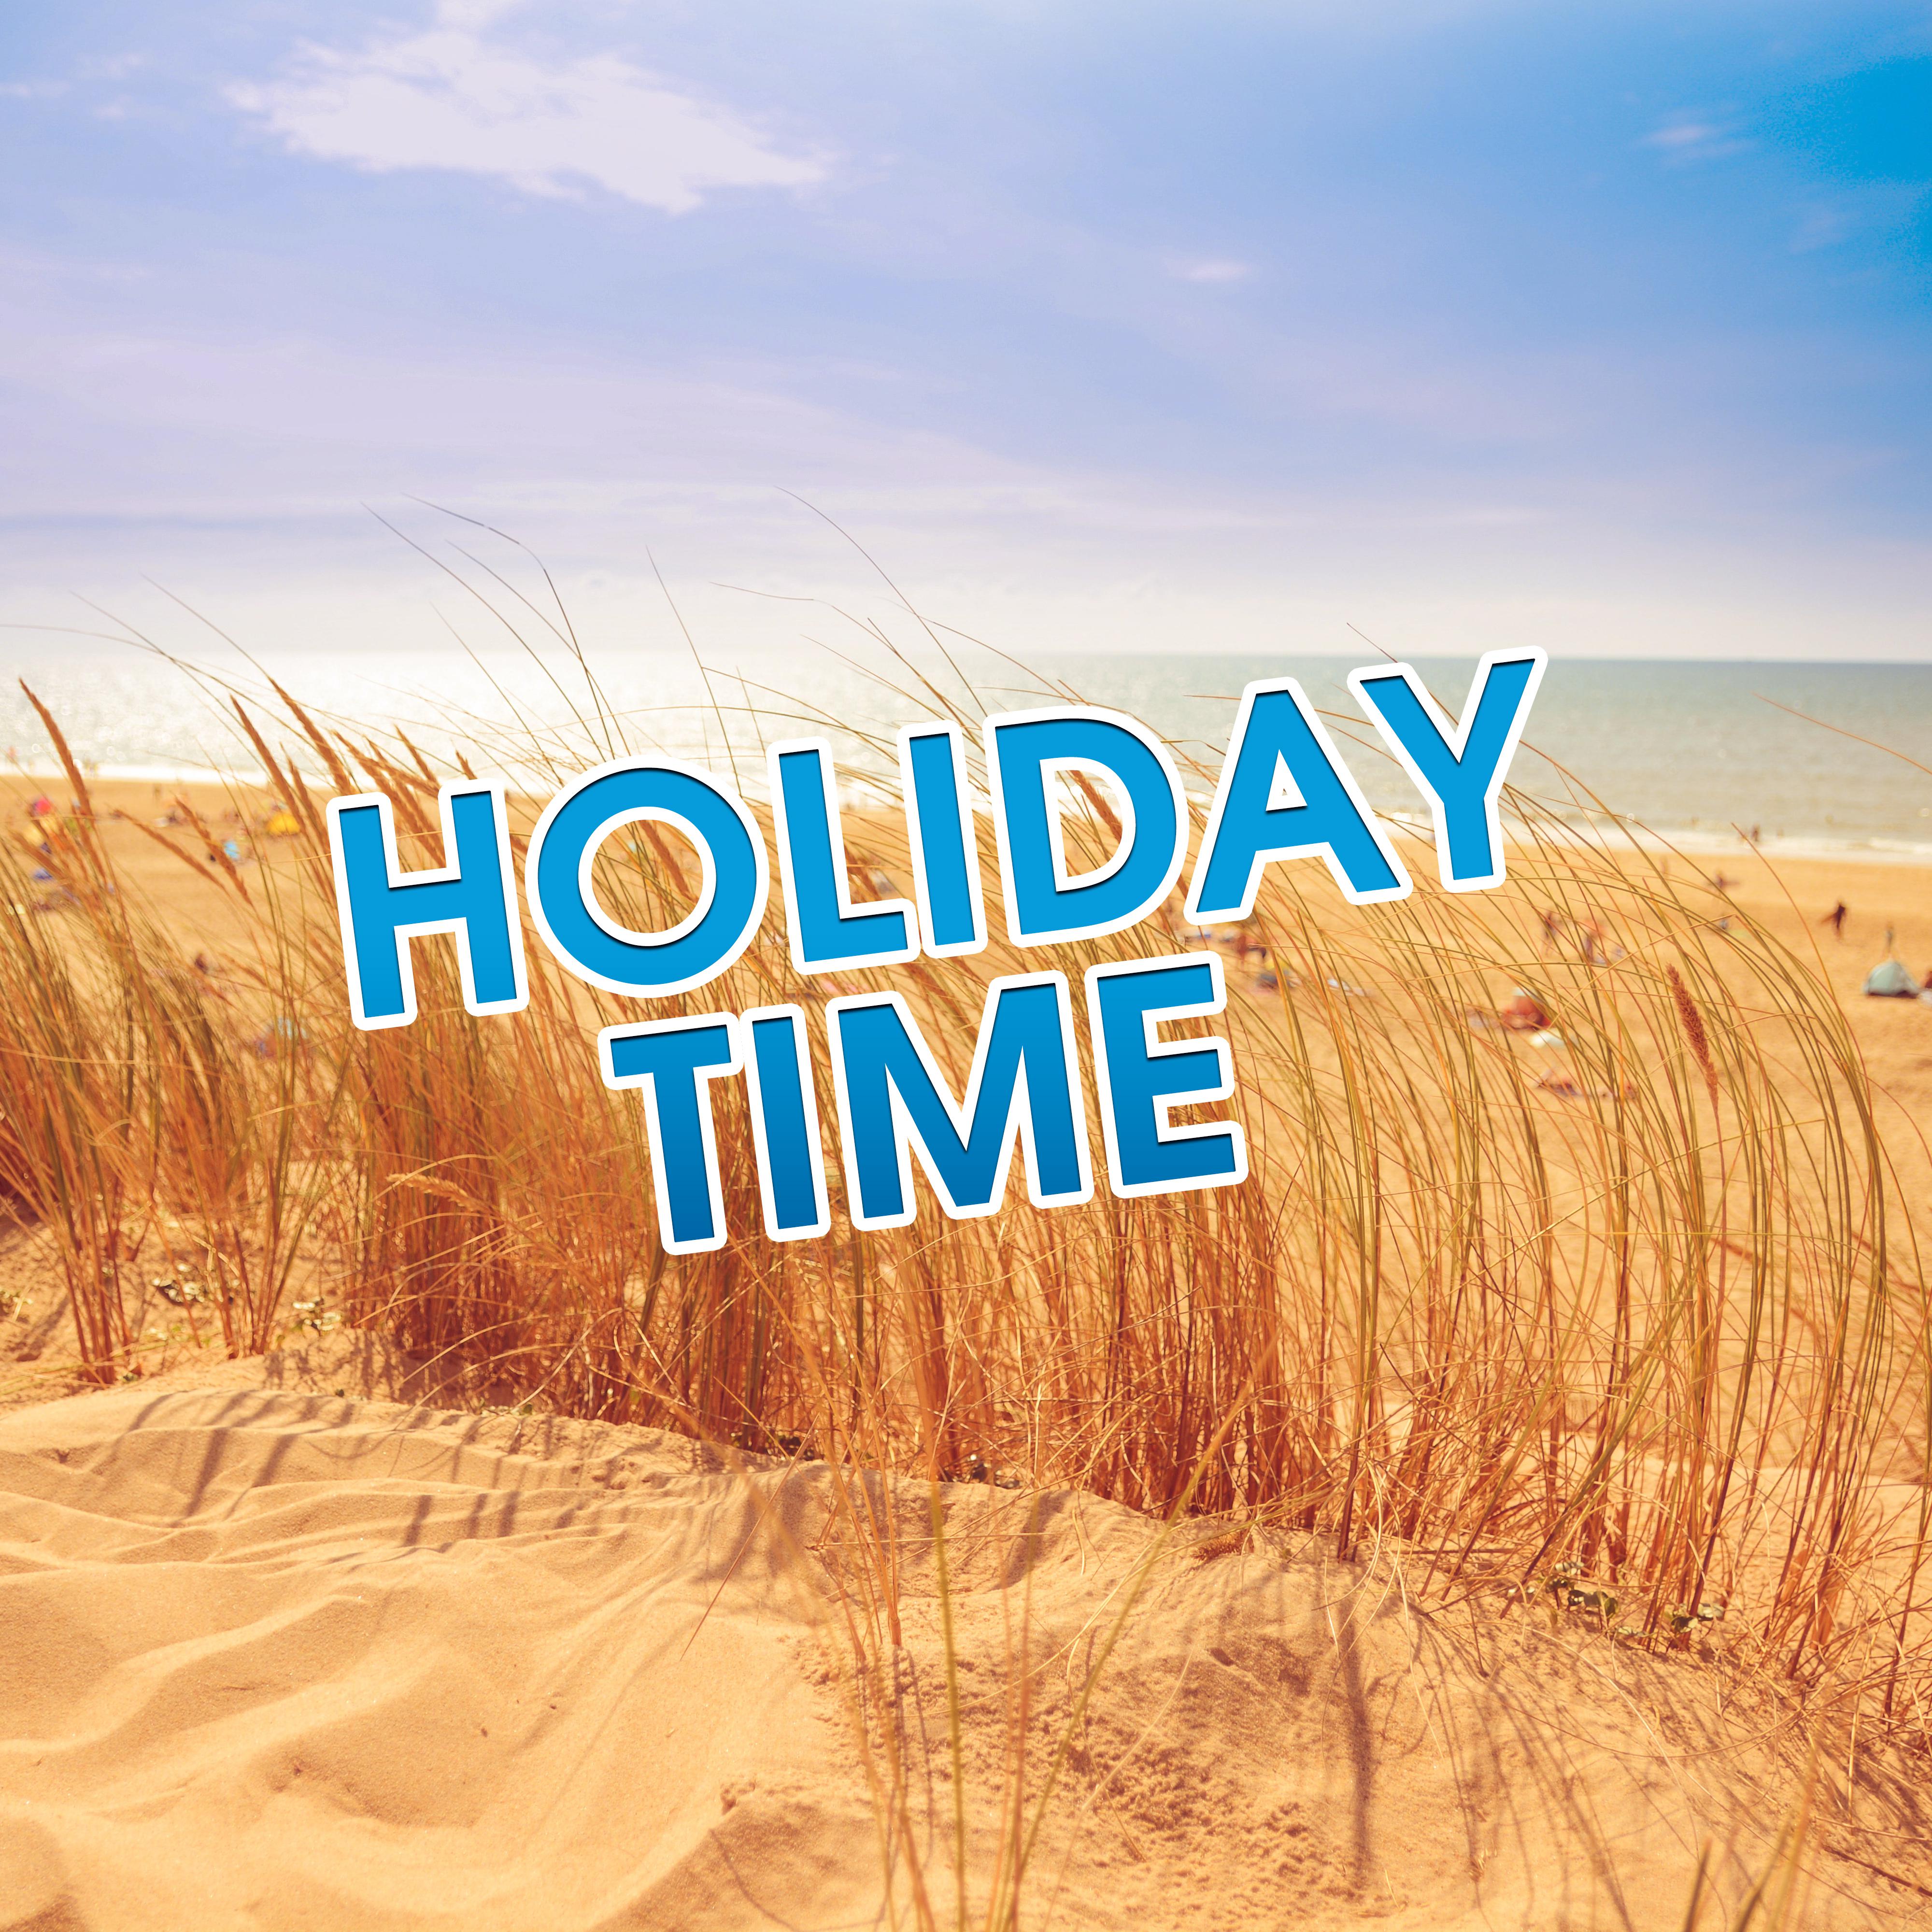 Holiday Time – Summer Beats to Rest, Sunbed Chill, Tropical Lounge Music, Relax on the Beach